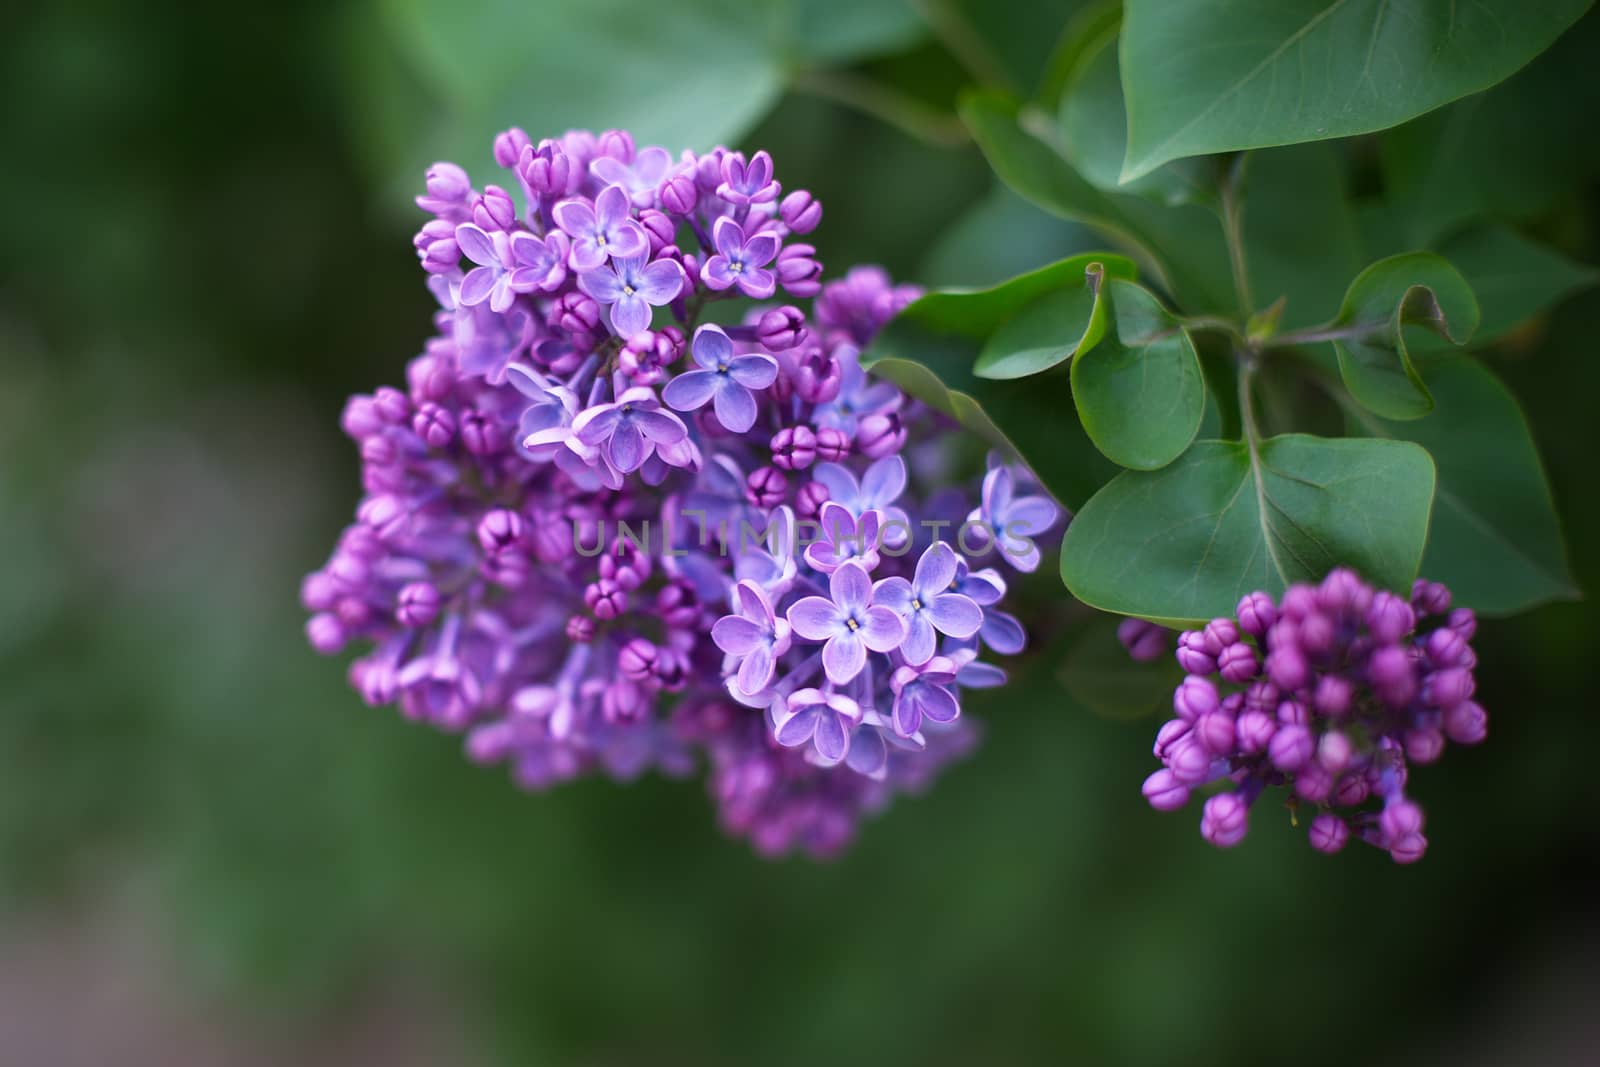 Lilac flowers in the garden by wolegsan